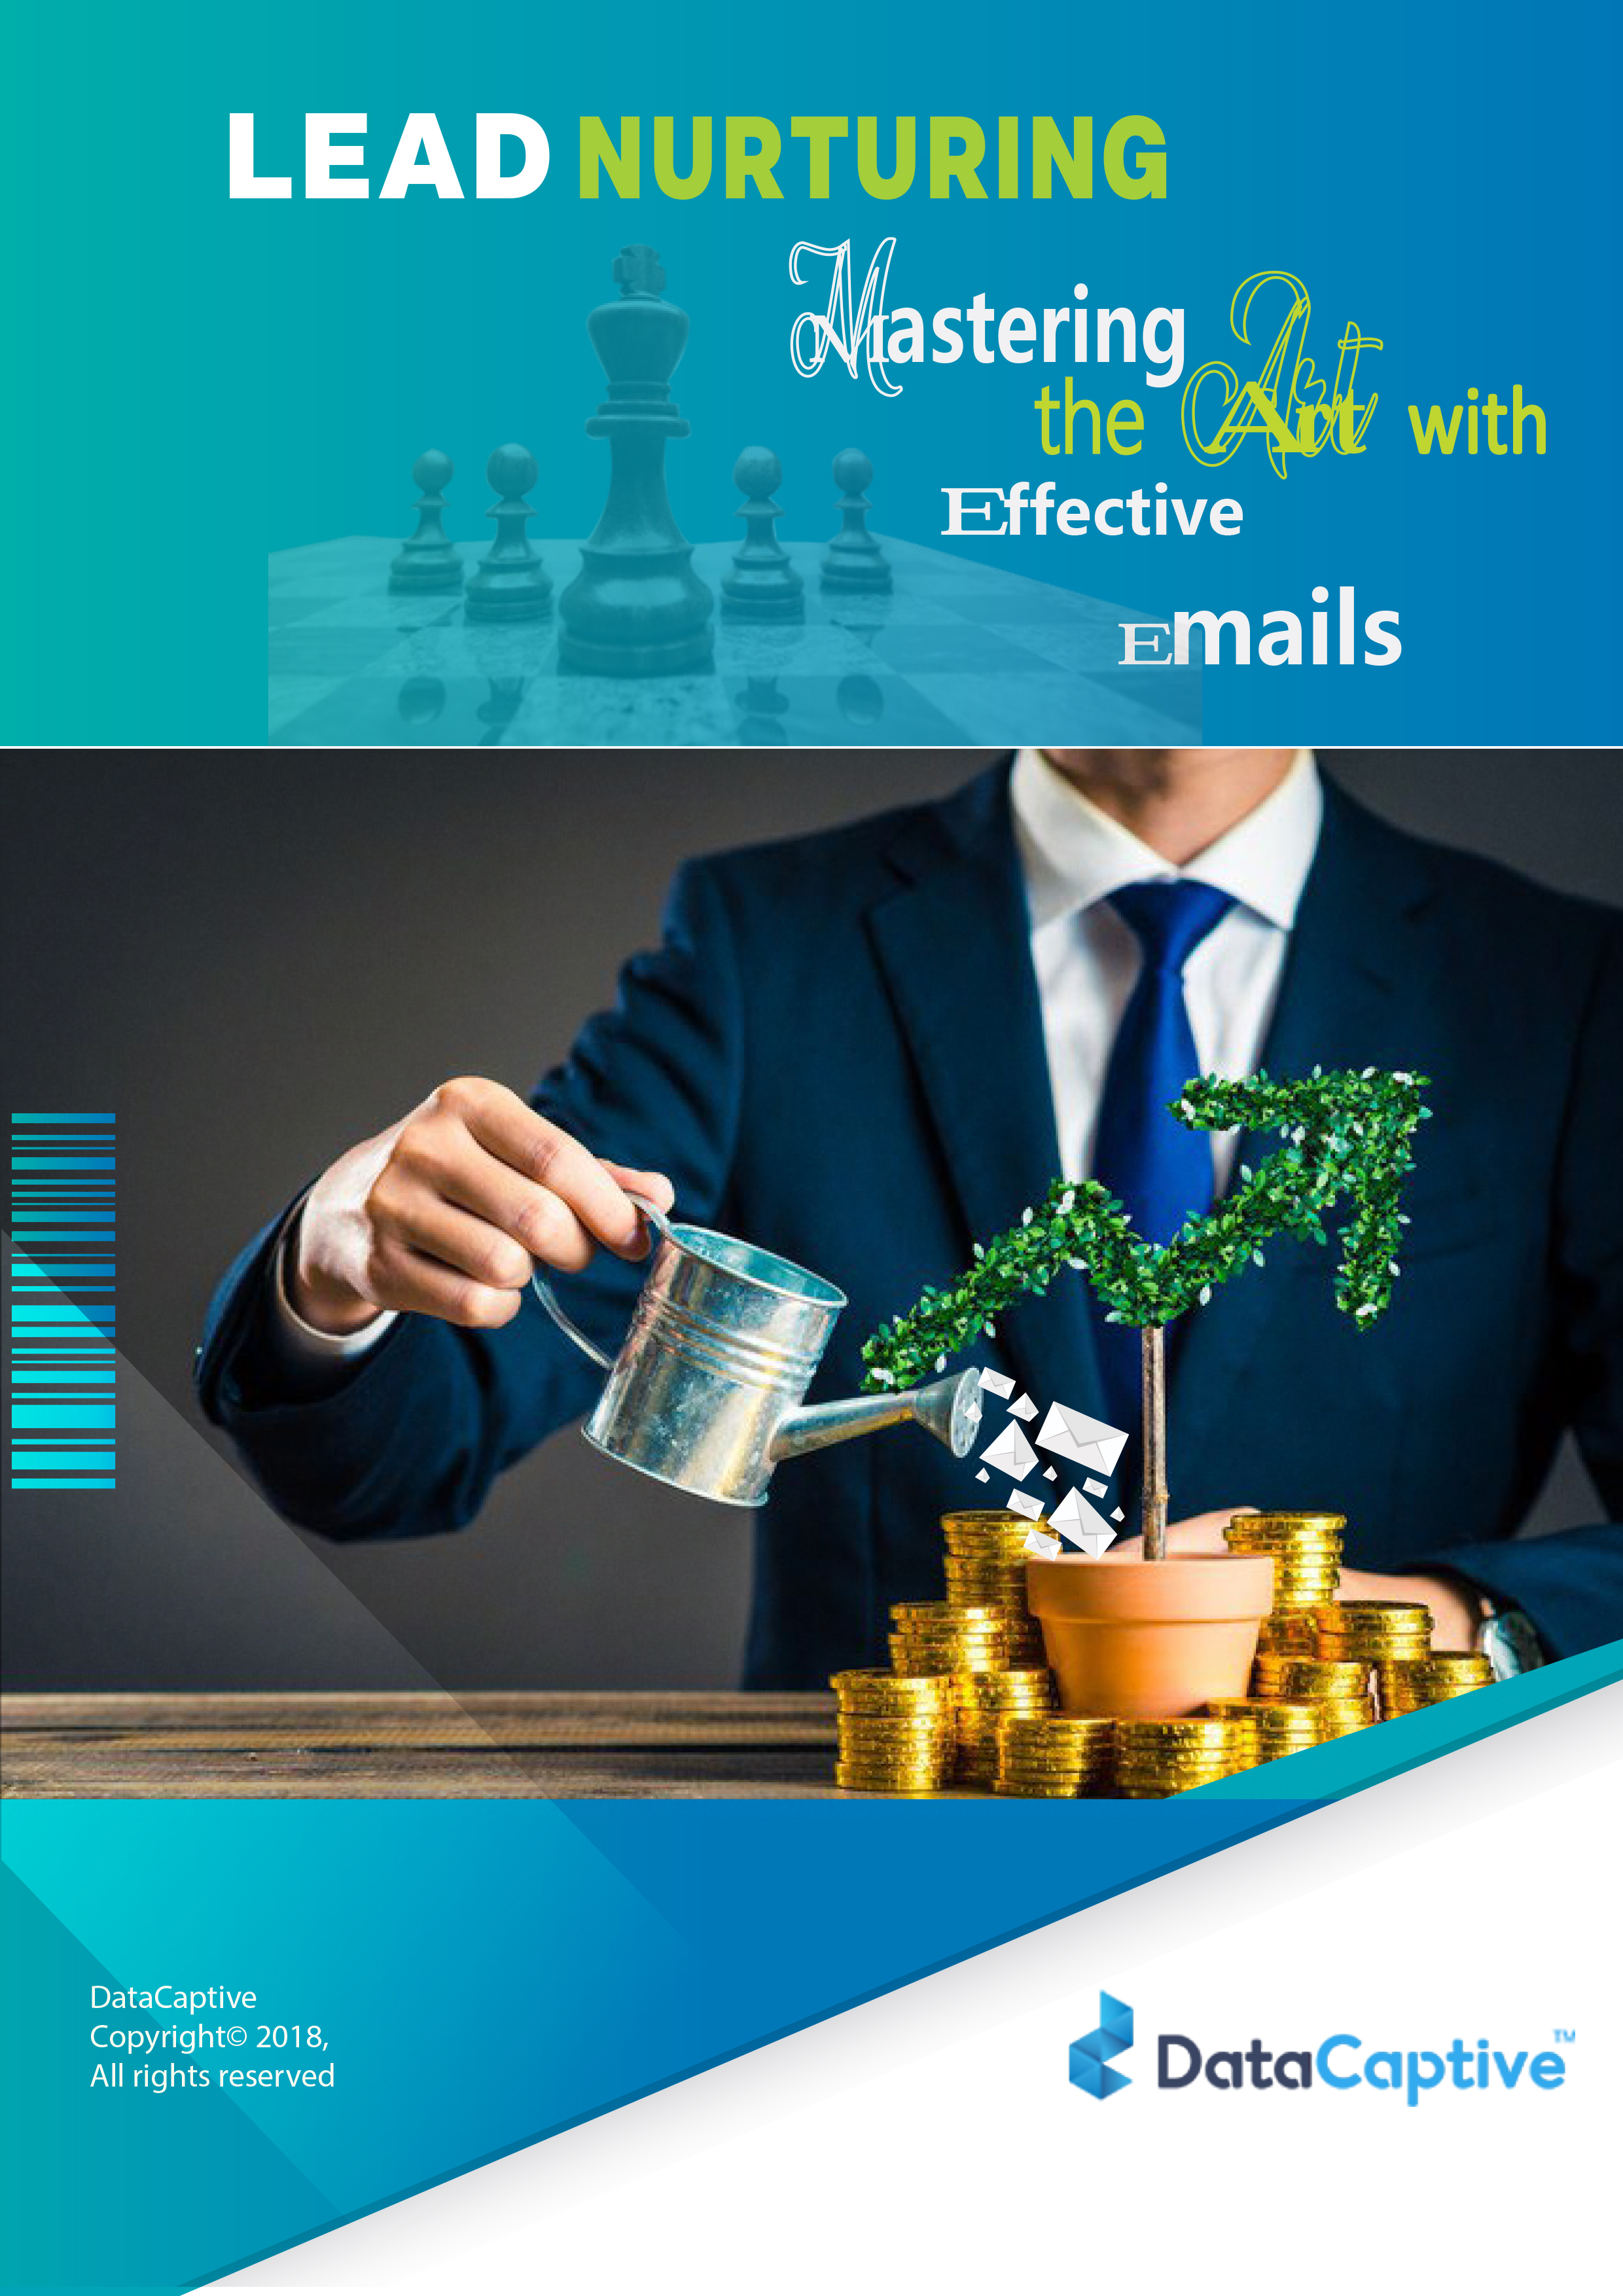 Lead Nurturing - Mastering the art with effective emails - DataCaptive Whitepaper